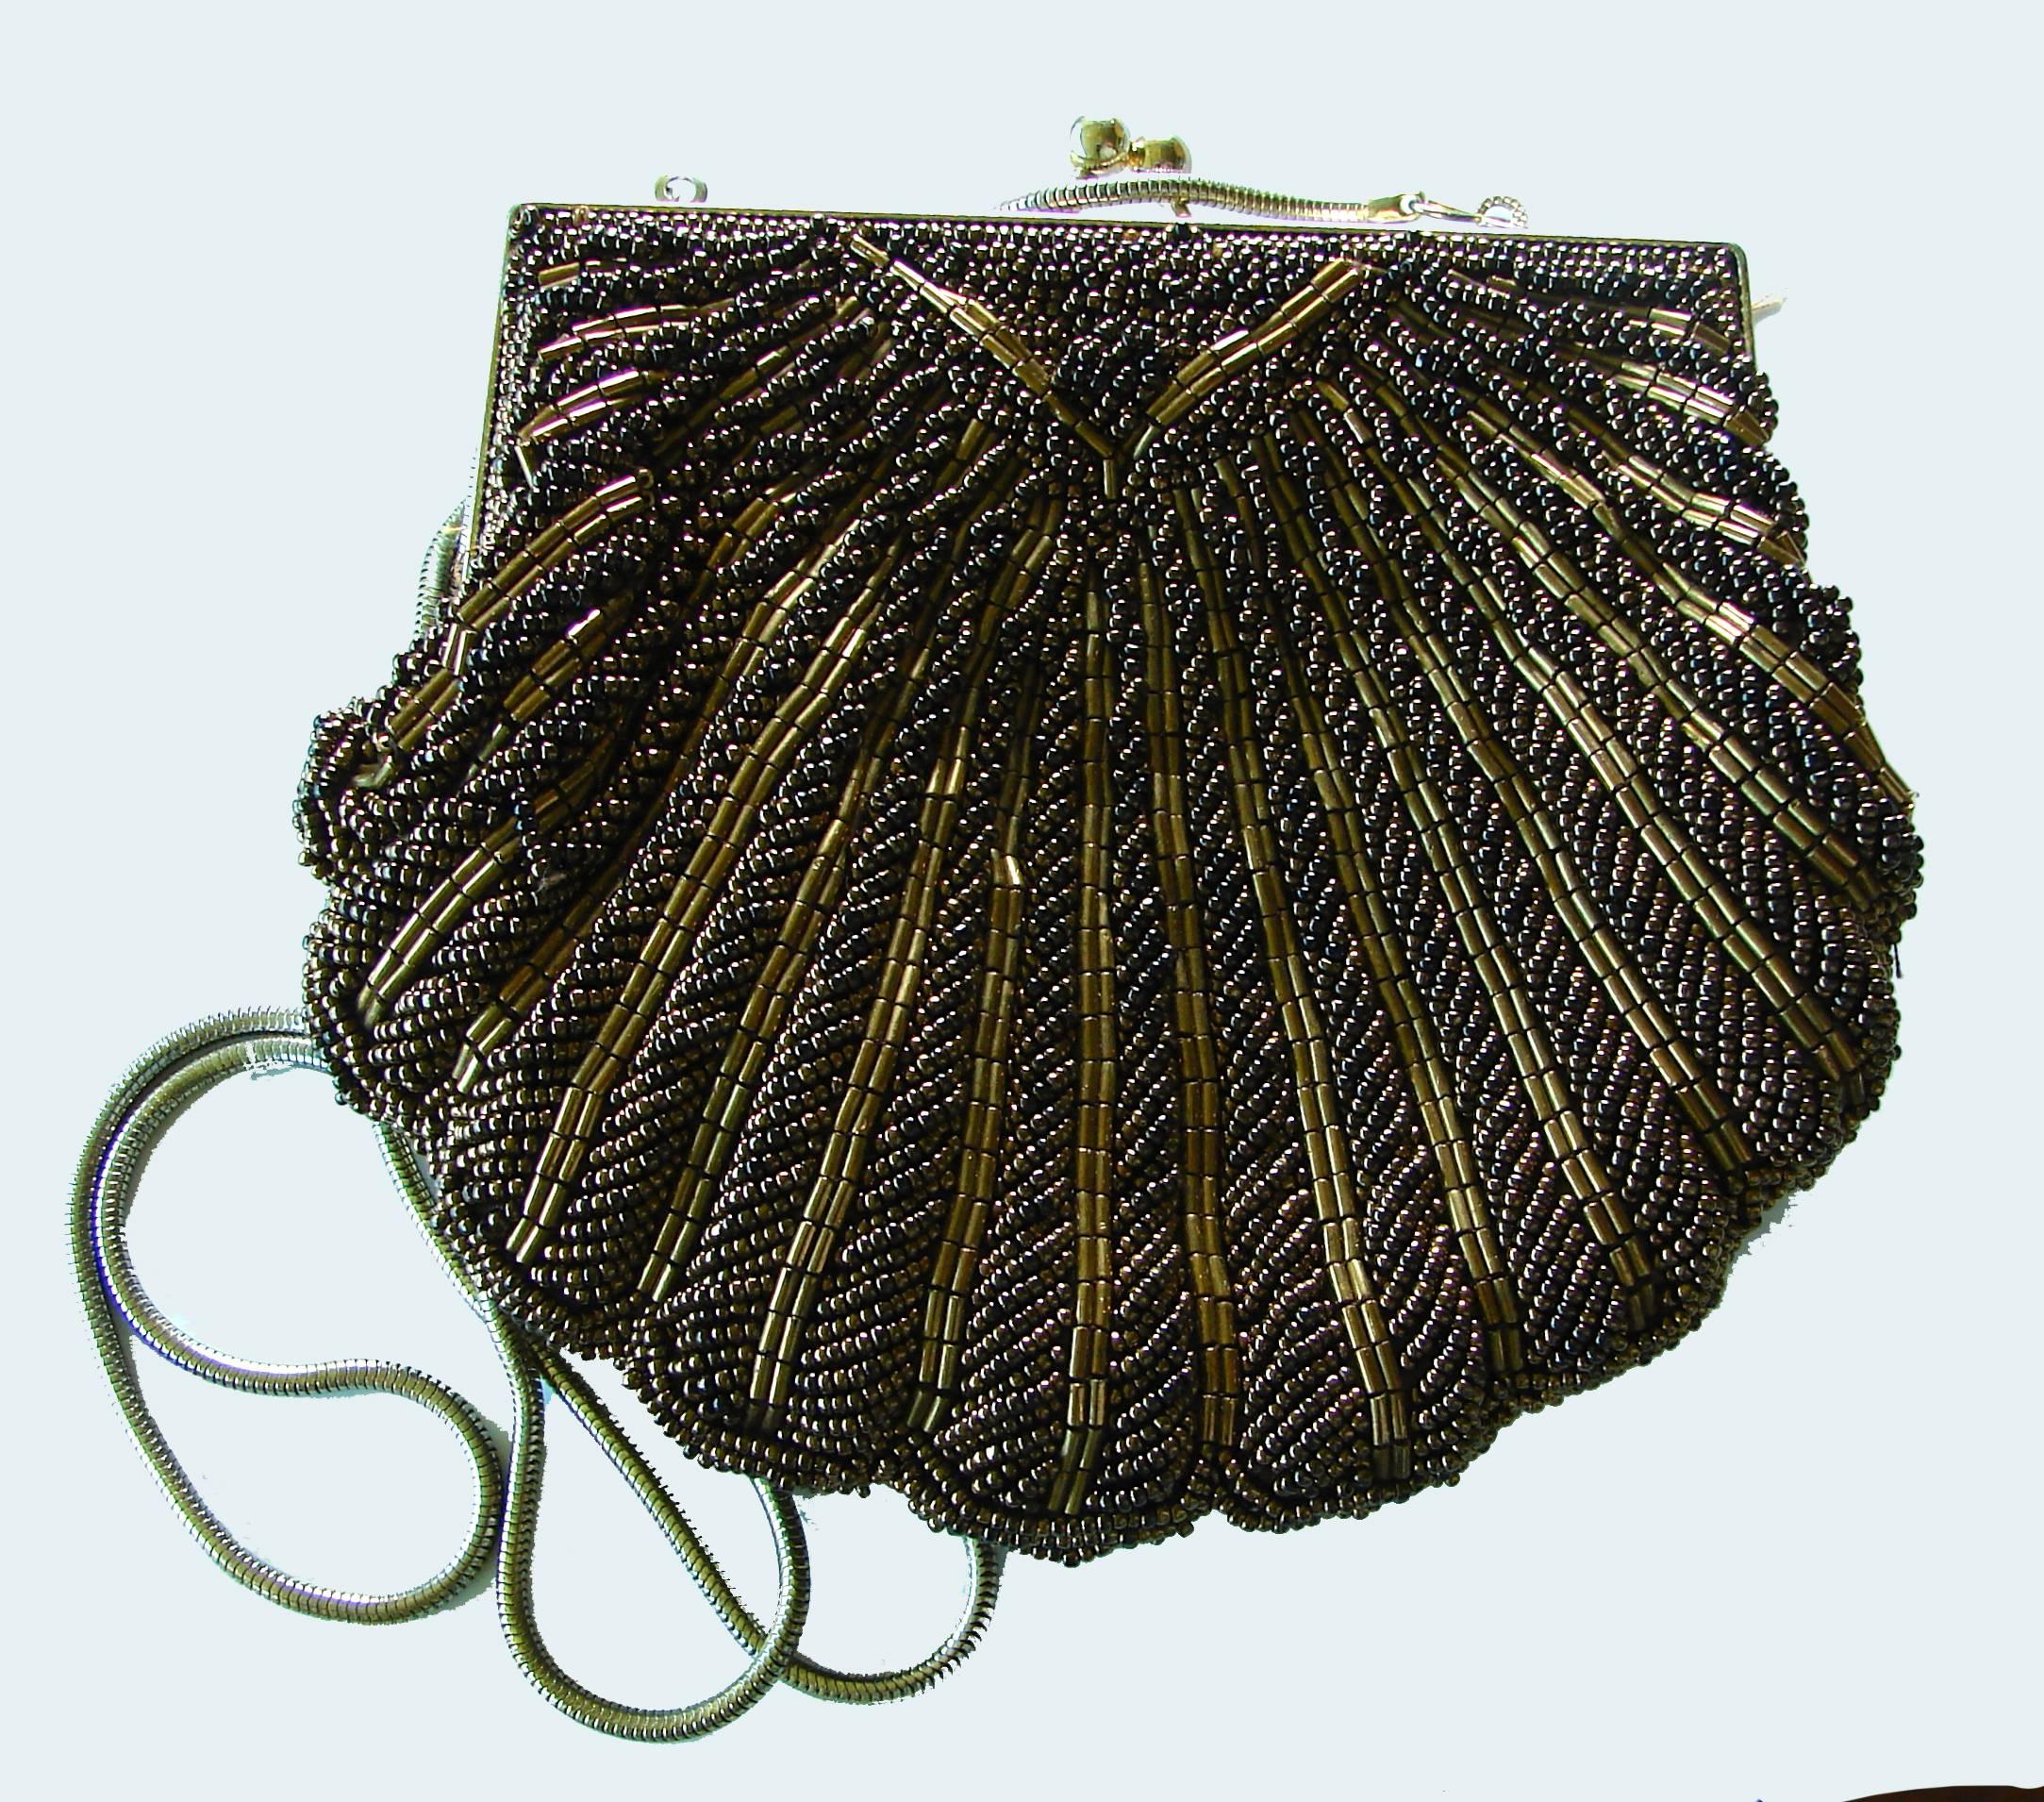 This lovely little evening bag was designed by Walborg in the late 1970s.  It features intricate beading in shades of bronze and brown on the exterior and a rich brown silk satin lining with one small interior pocket.  It fastens with a gold